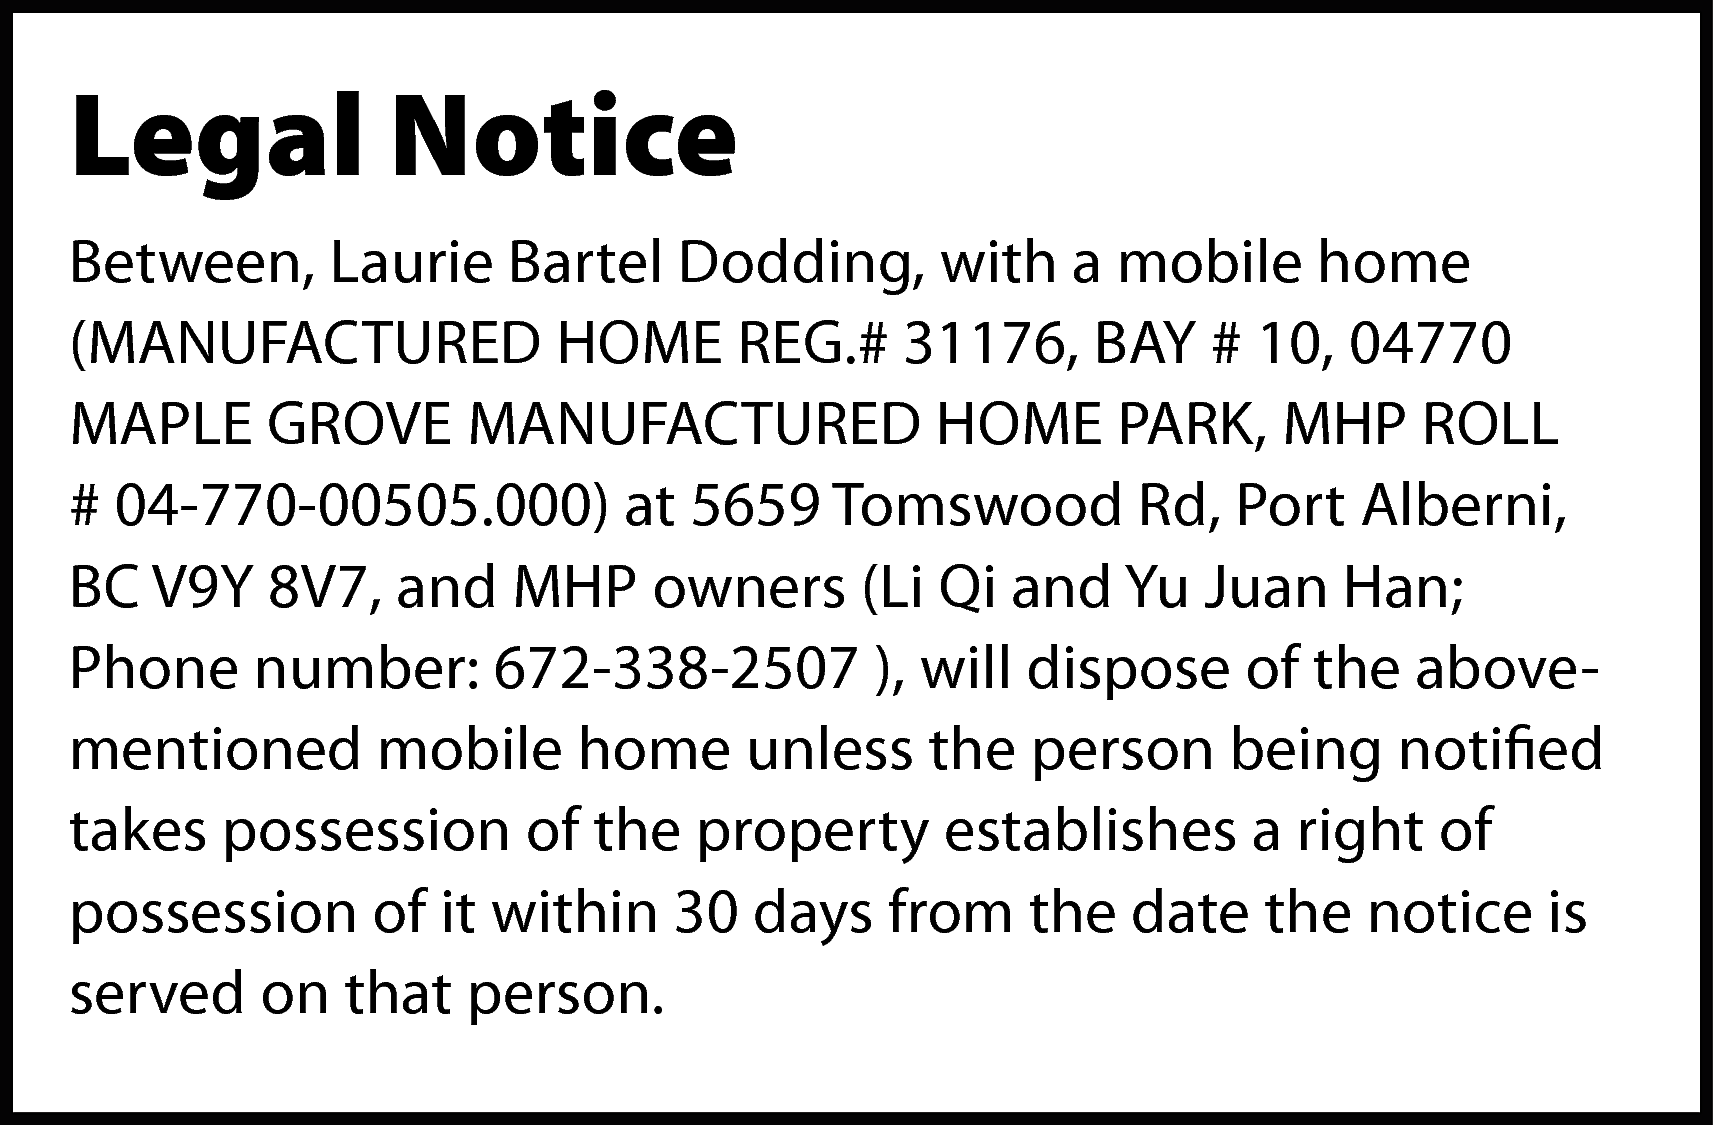 Legal Notice <br>Between, Laurie Bartel  Legal Notice  Between, Laurie Bartel Dodding, with a mobile home  (MANUFACTURED HOME REG.# 31176, BAY # 10, 04770  MAPLE GROVE MANUFACTURED HOME PARK, MHP ROLL  # 04-770-00505.000) at 5659 Tomswood Rd, Port Alberni,  BC V9Y 8V7, and MHP owners (Li Qi and Yu Juan Han;  Phone number: 672-338-2507 ), will dispose of the abovementioned mobile home unless the person being notified  takes possession of the property establishes a right of  possession of it within 30 days from the date the notice is  served on that person.    